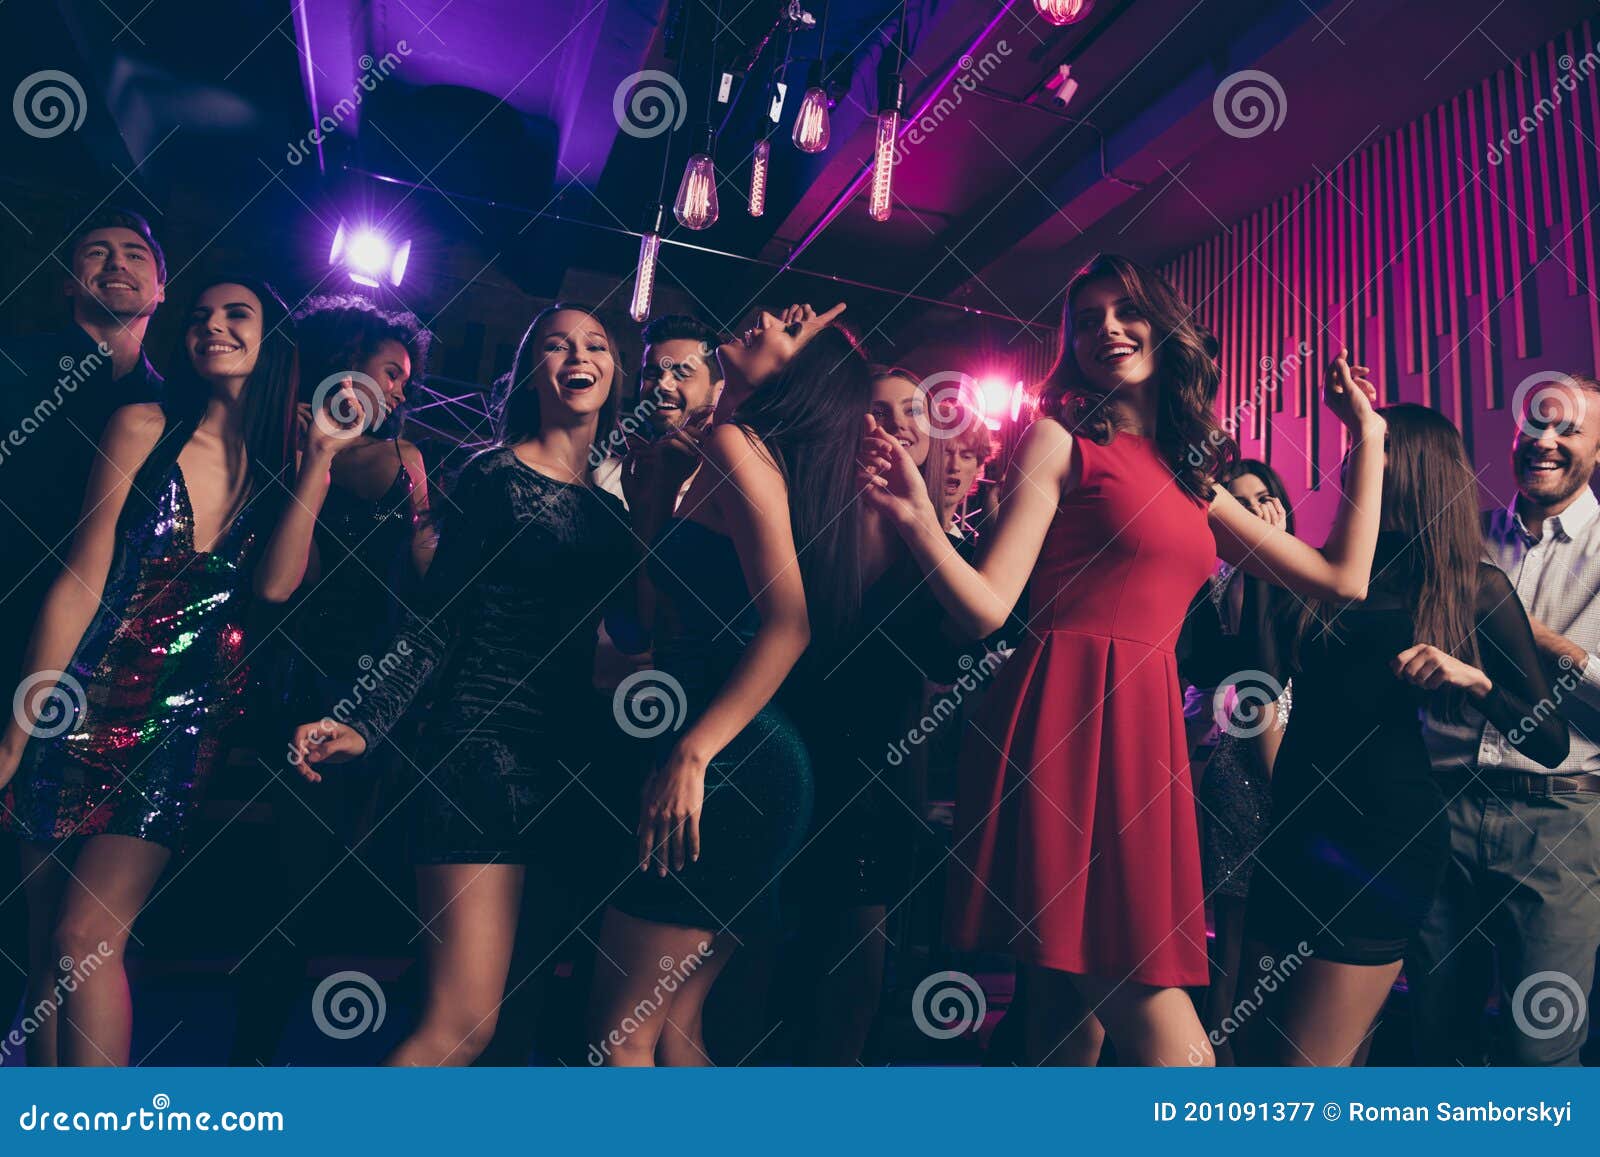 Low Angle Photo of People Company Dancing on Floor in Night Club with ...